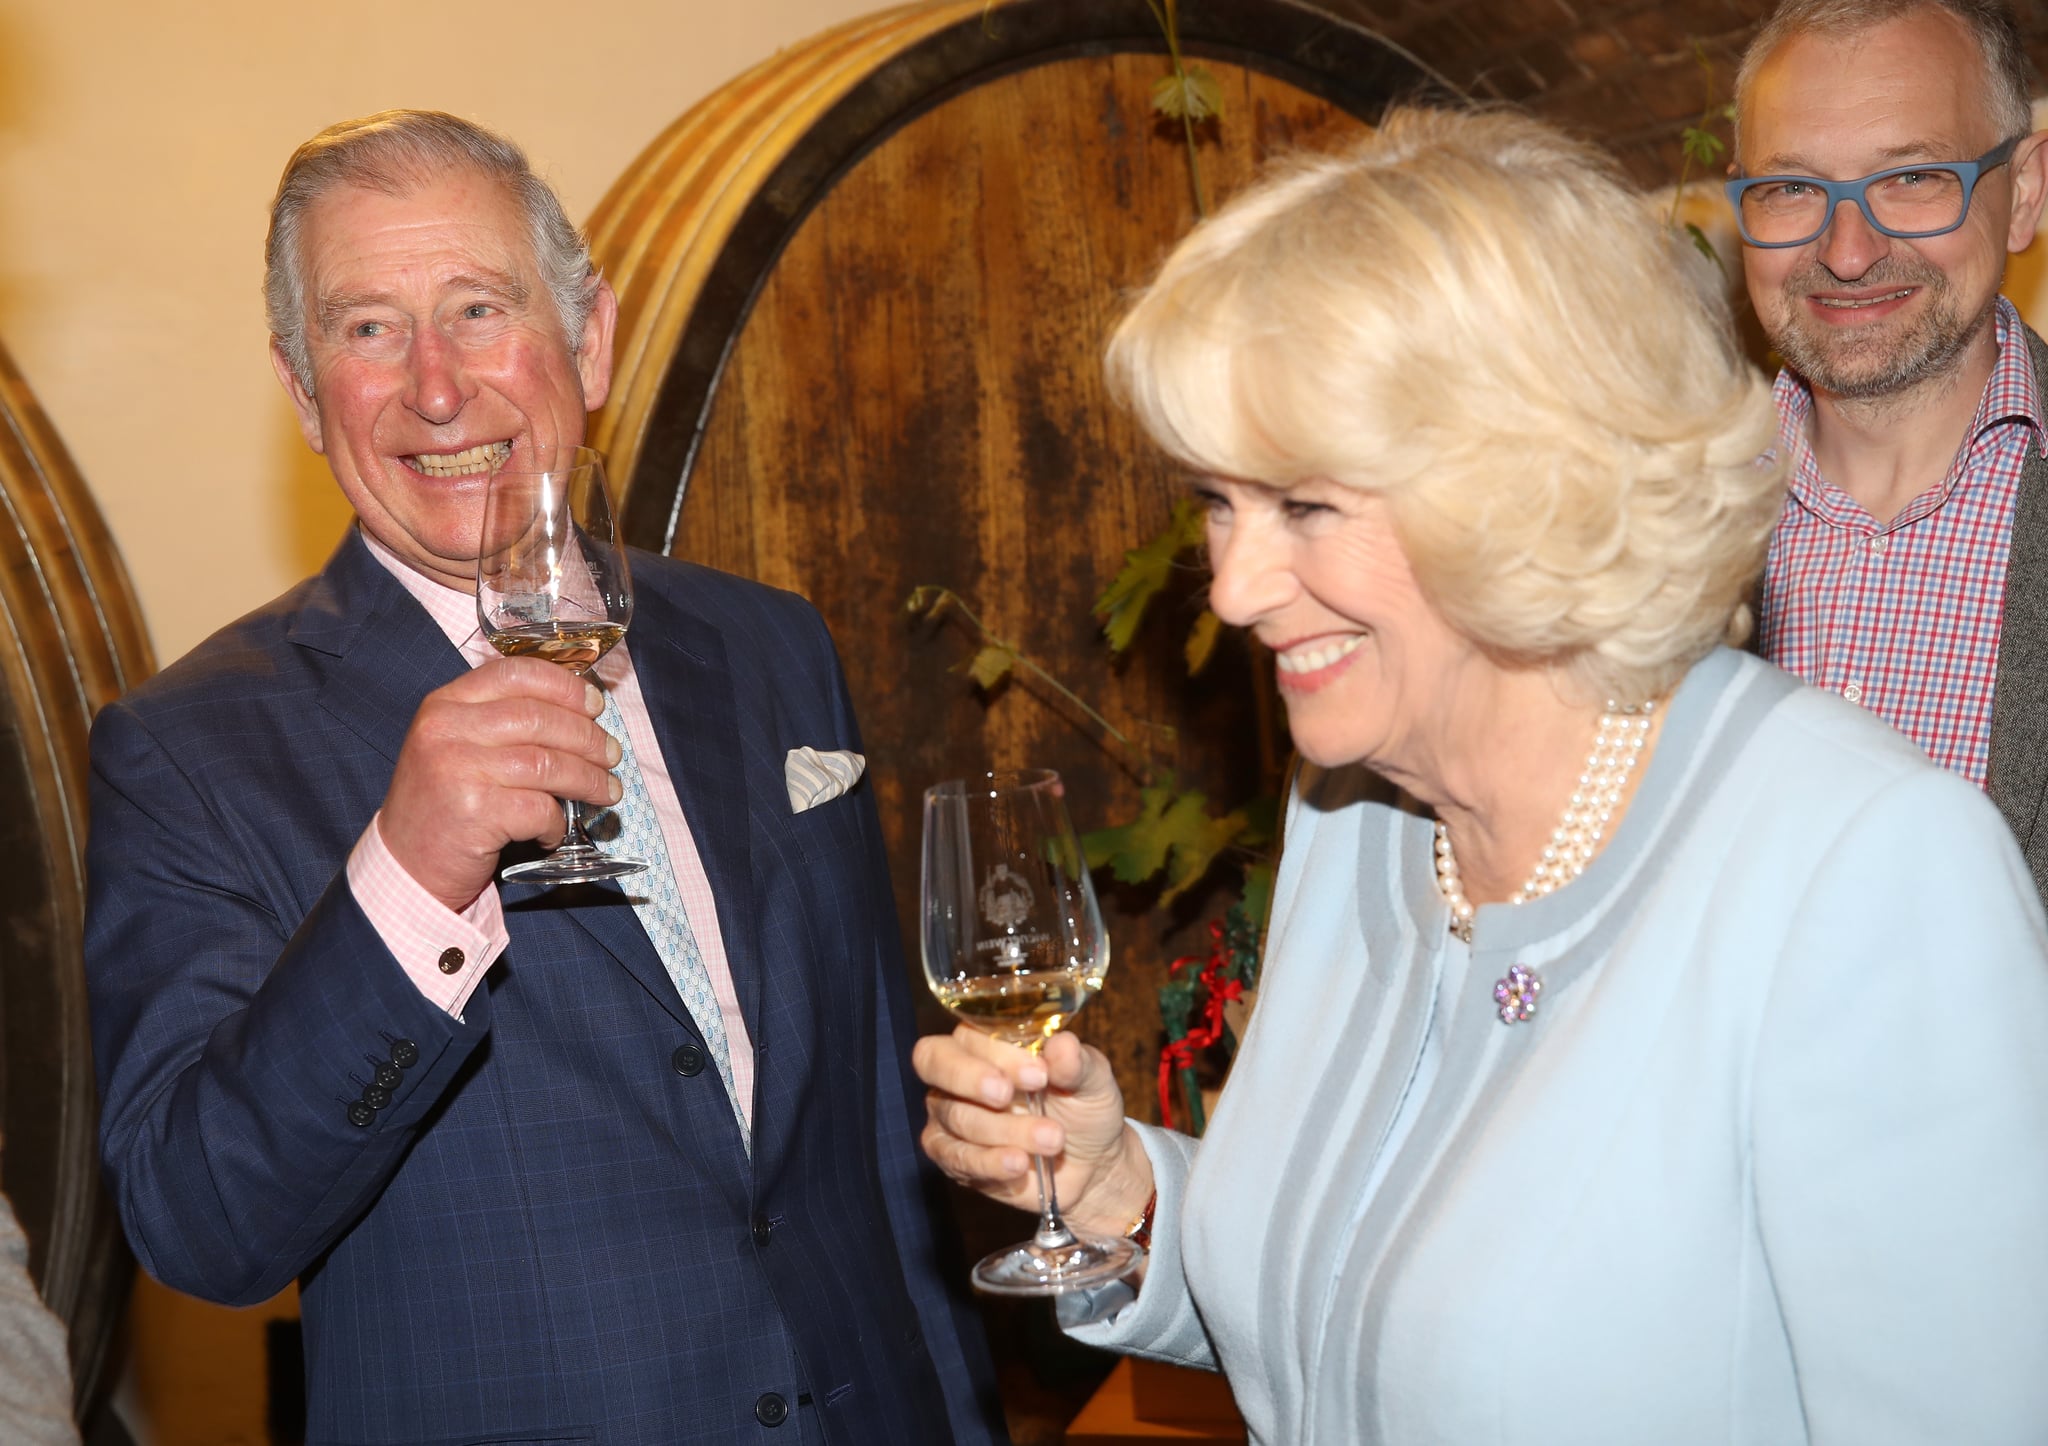 Prince-Charles-his-wife-Camilla-tasted-wine-during-trip.jpg